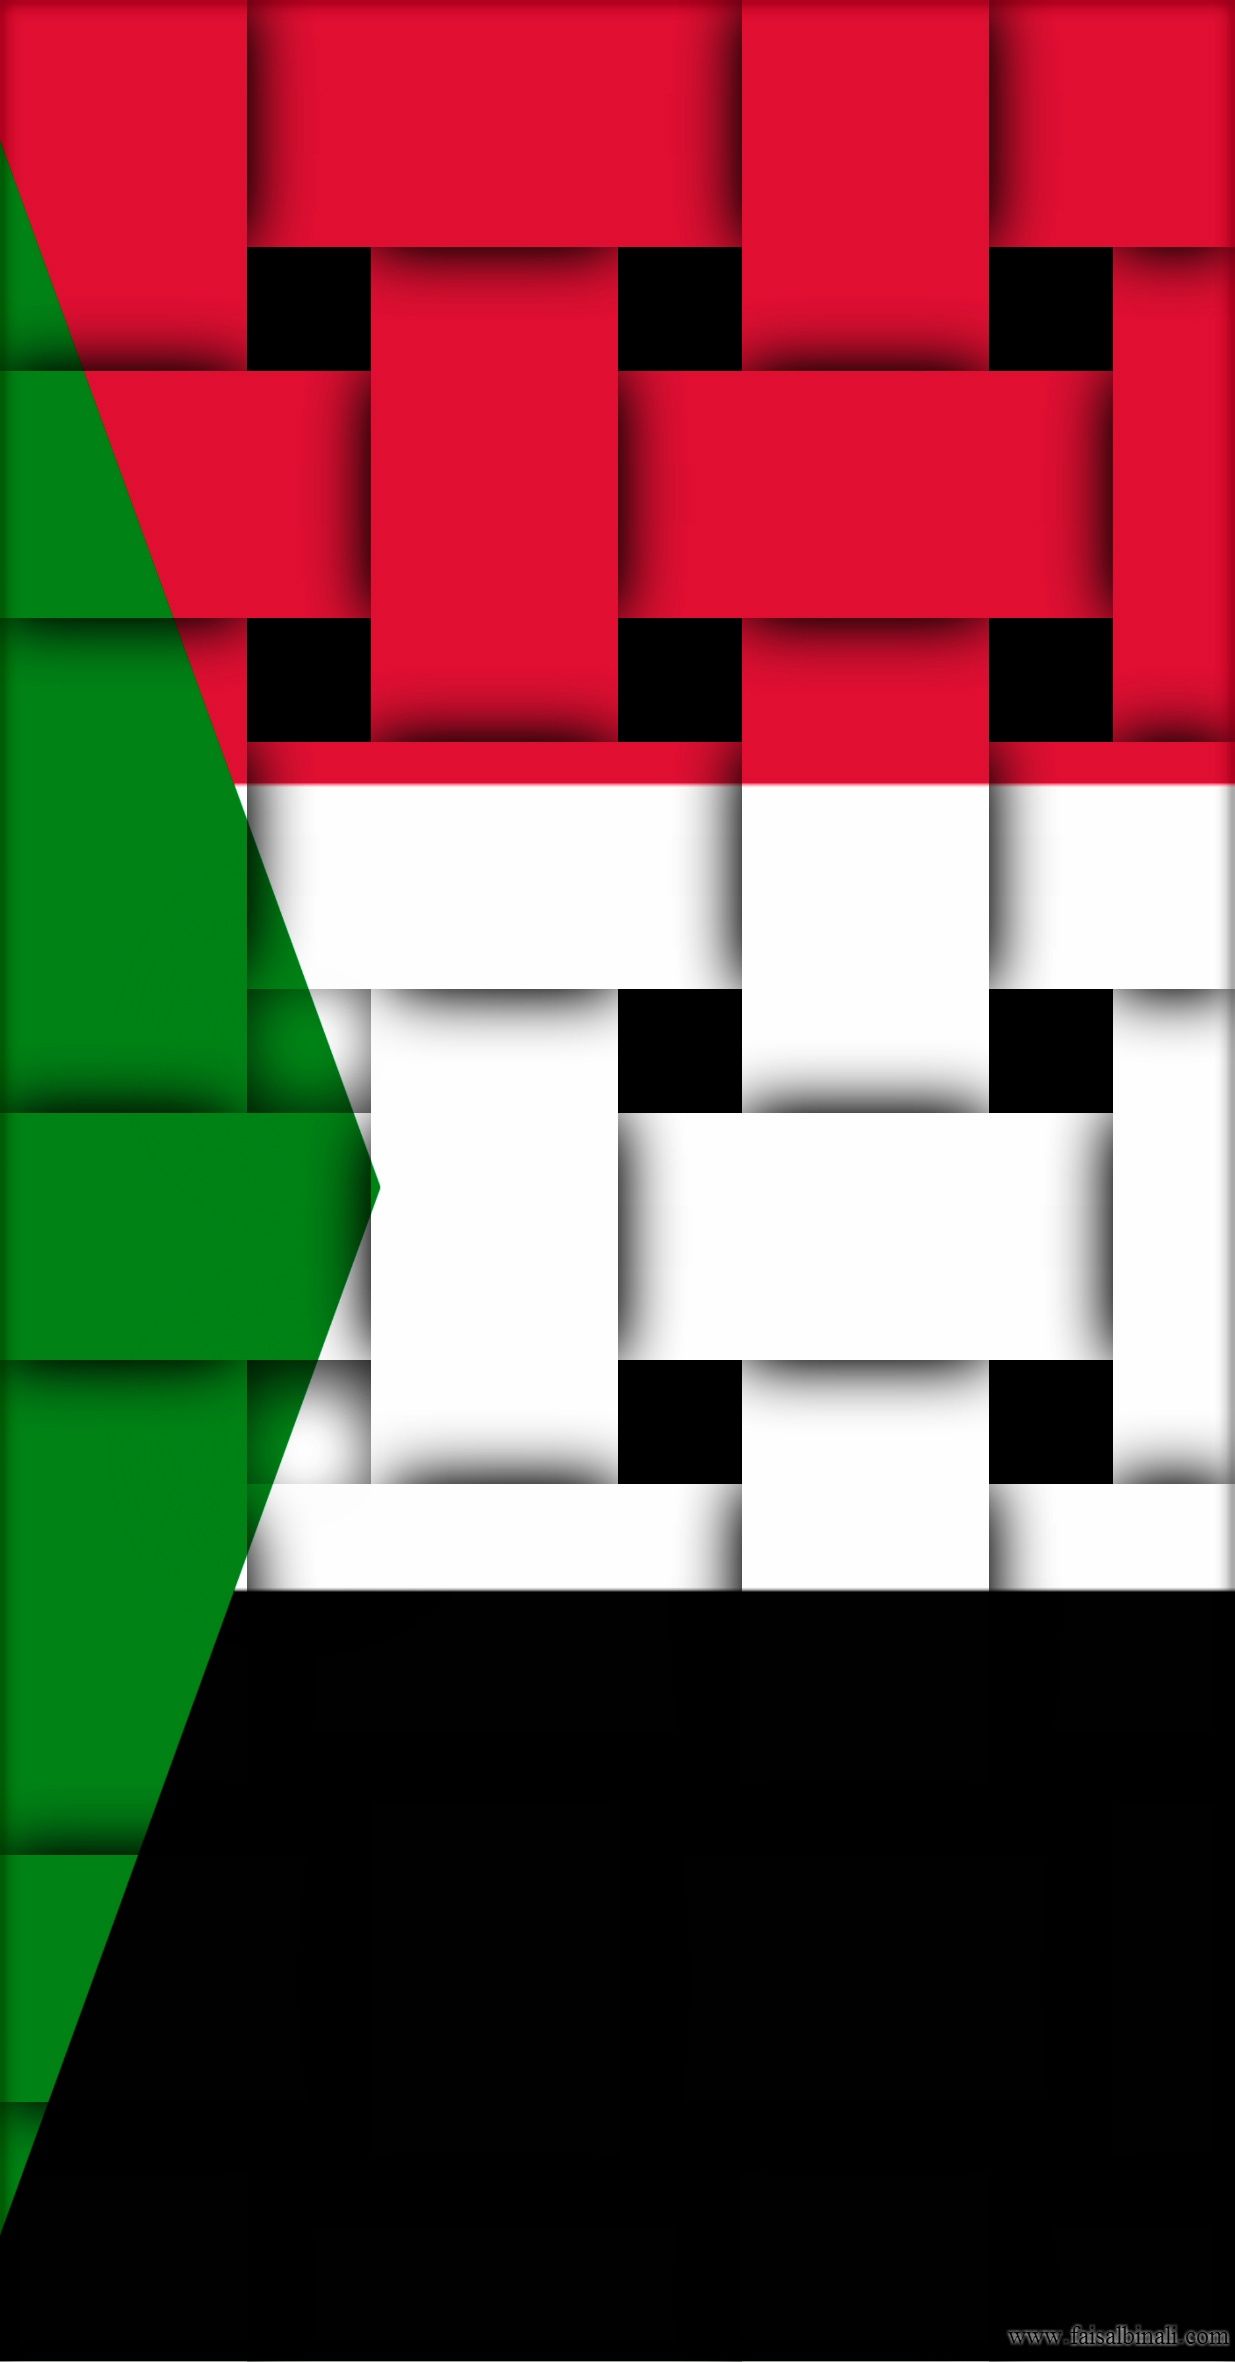 Sudan Flags Artwork Wallpaper For Smartphones Tablets And